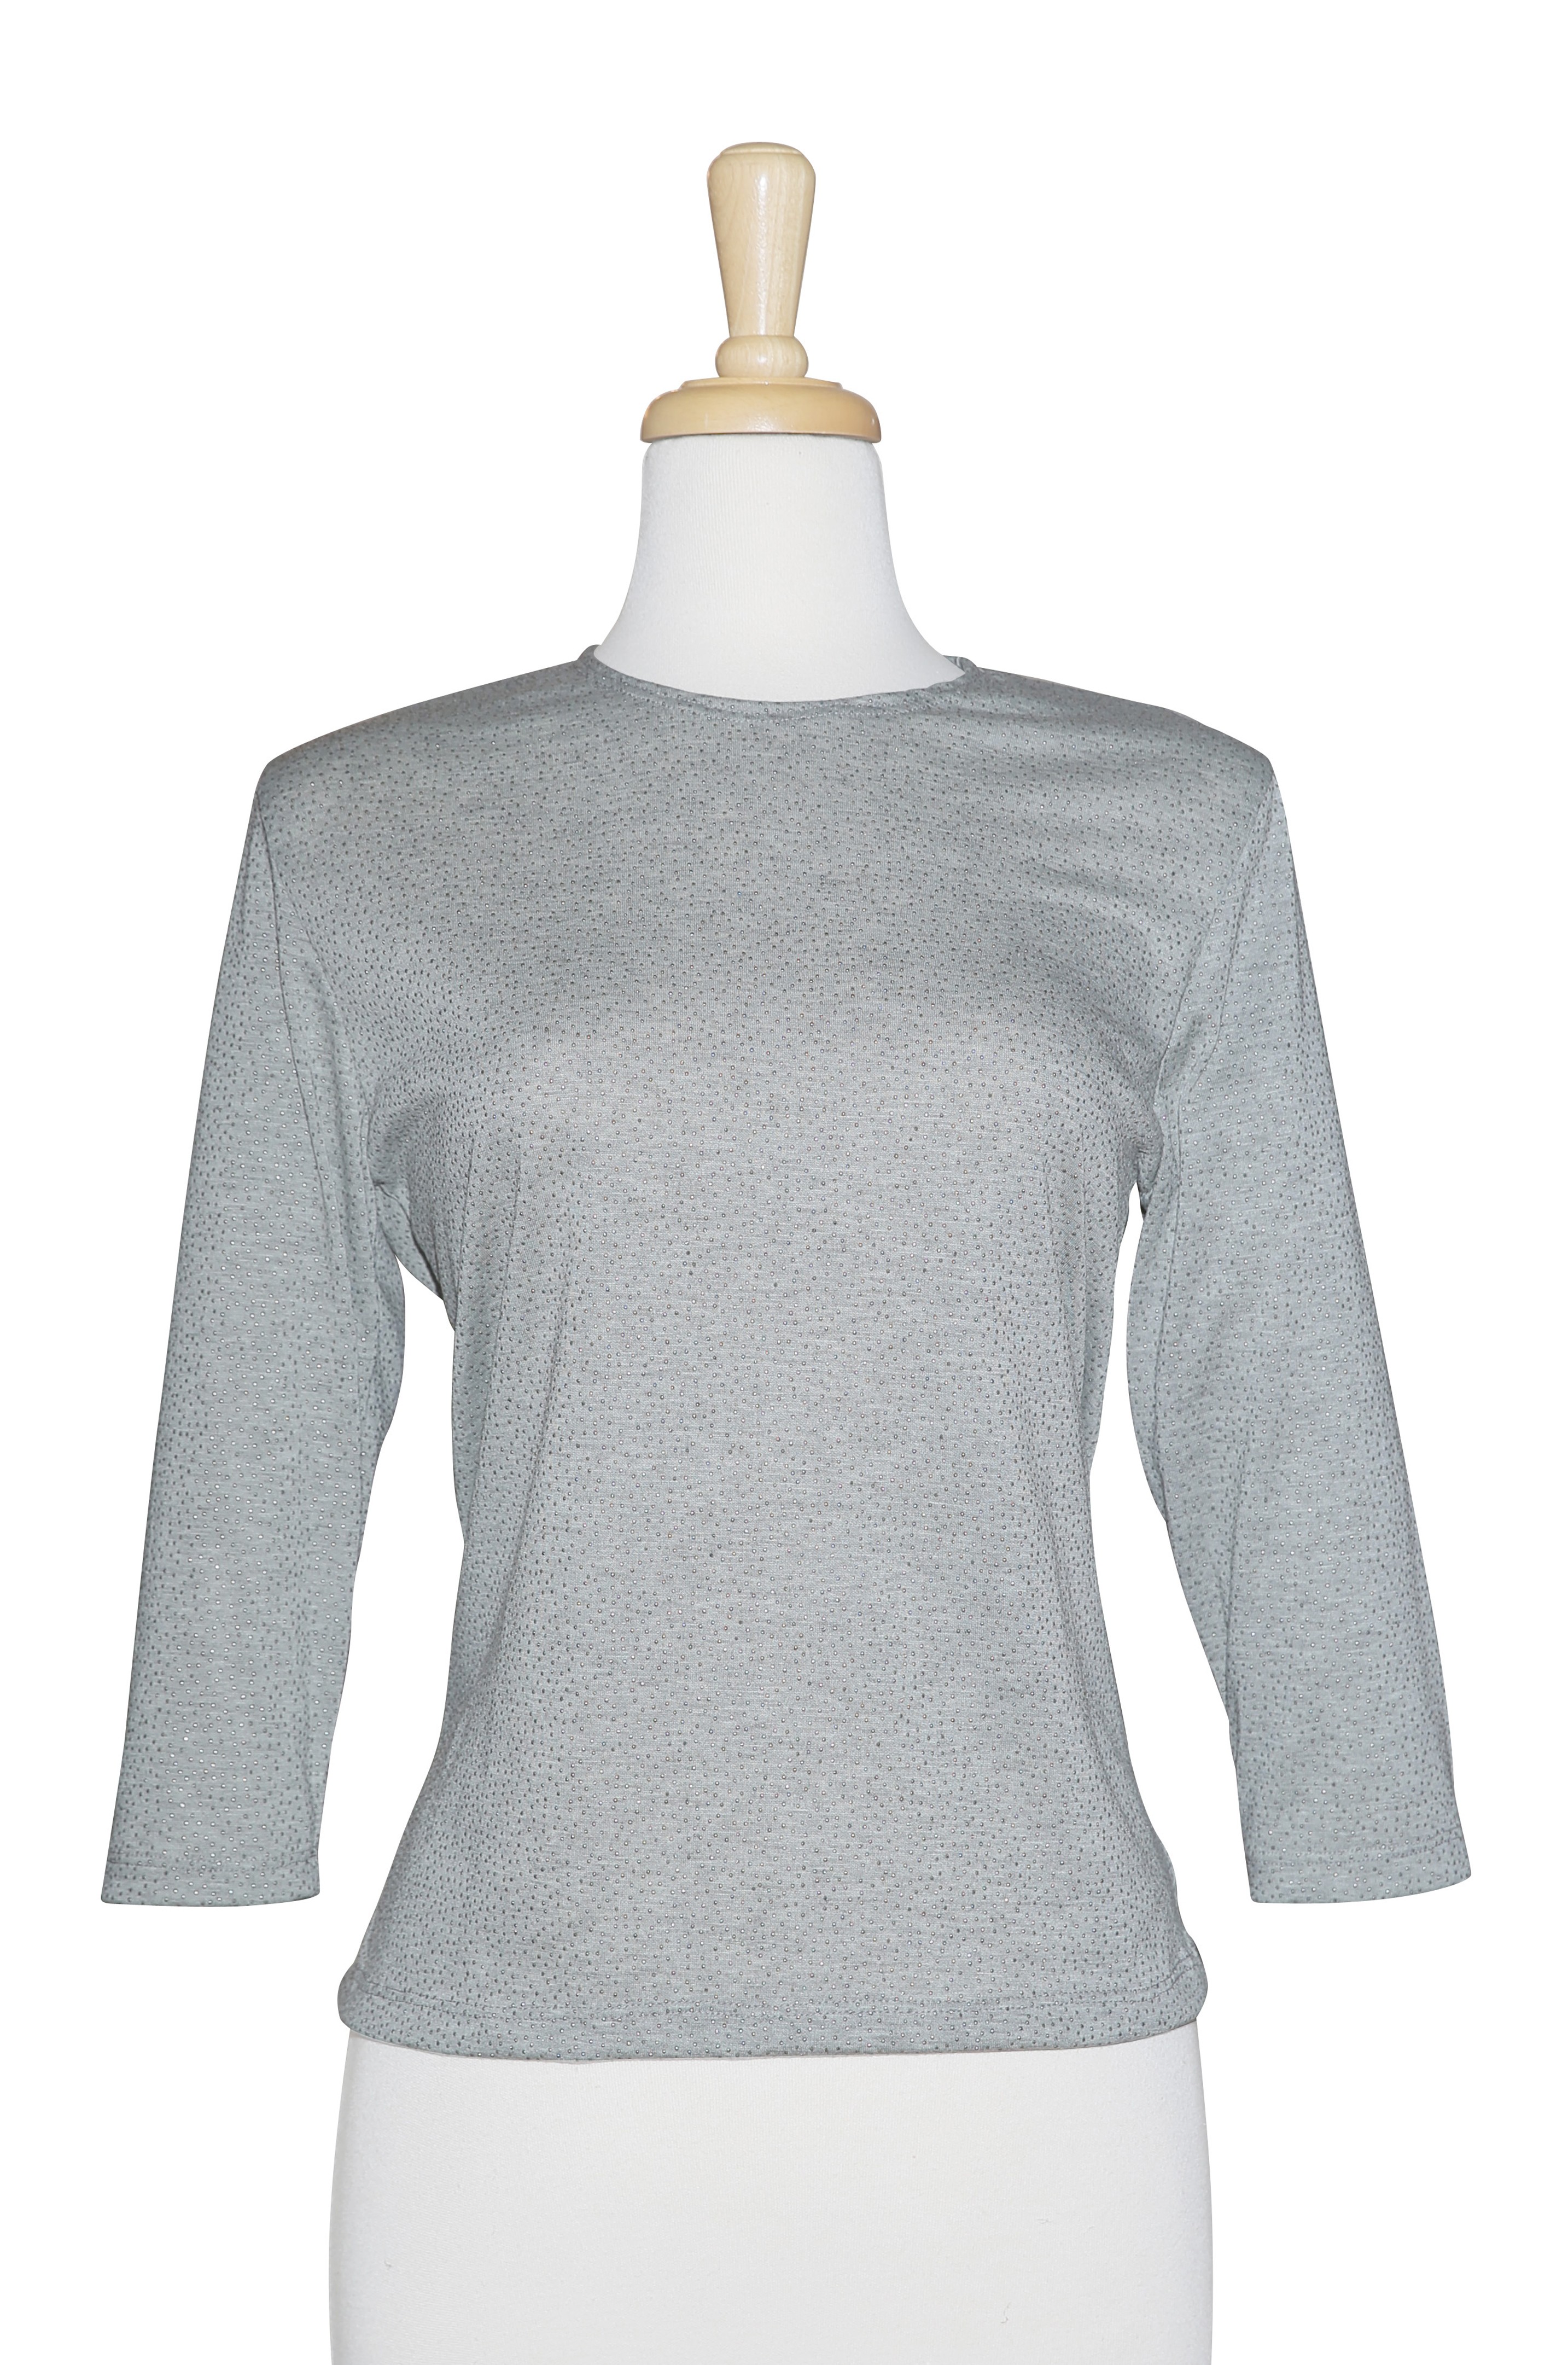 Plus Size Grey With Silver Pin Dots 3/4 Sleeve Cotton Top 